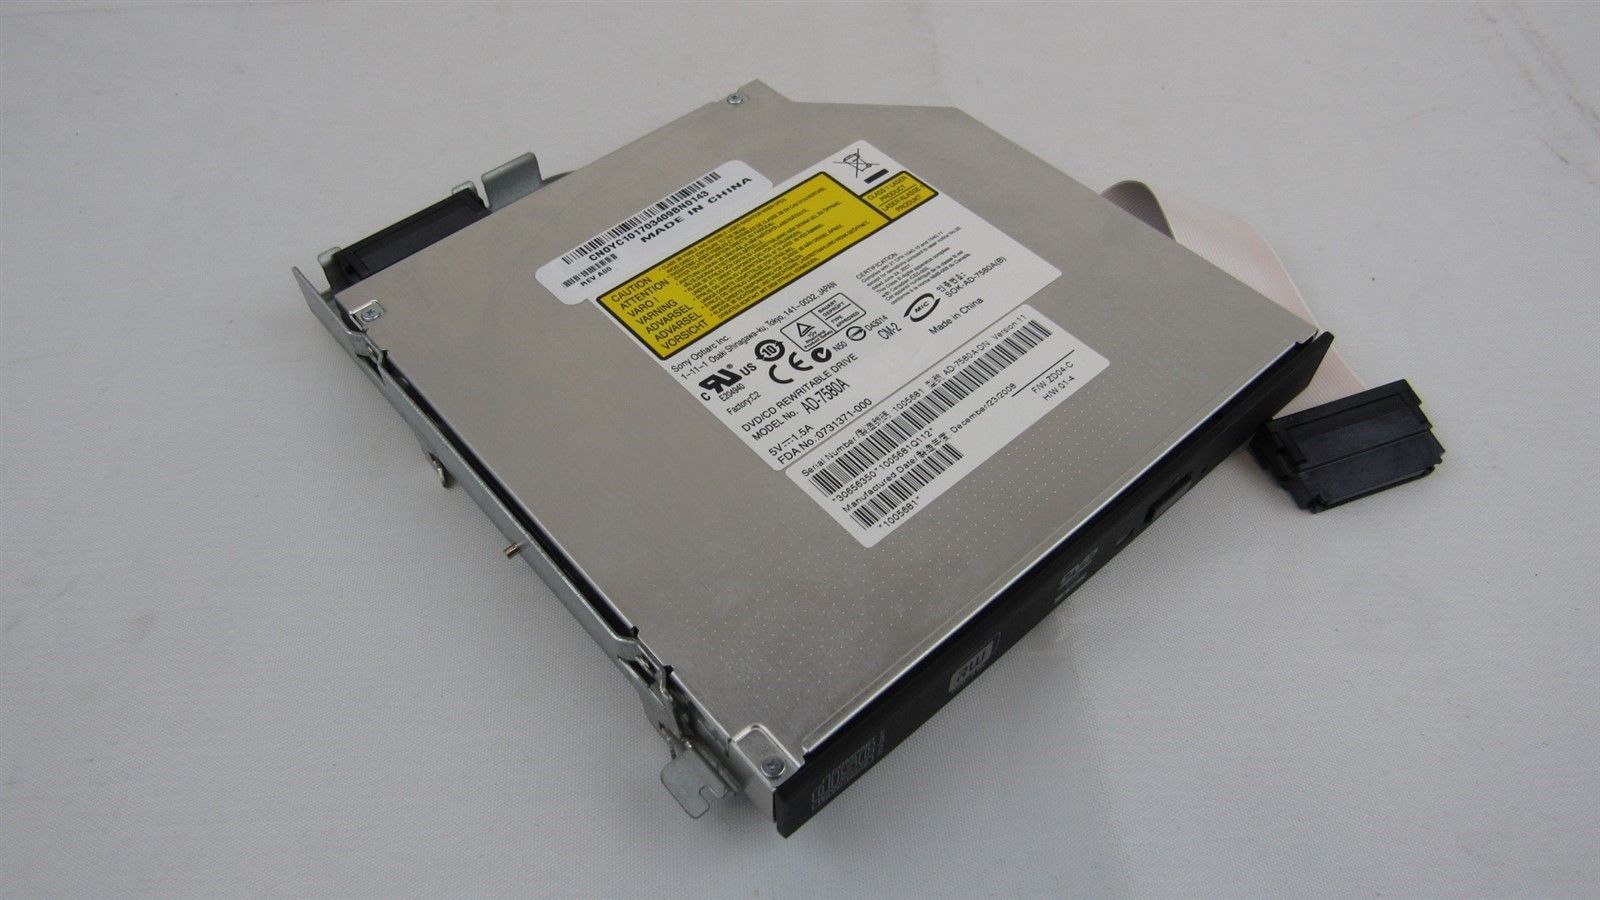 Dell 8X IDE CD/DVD-RW Internal Laptop Optical Drive with Tray F104H 0F104H